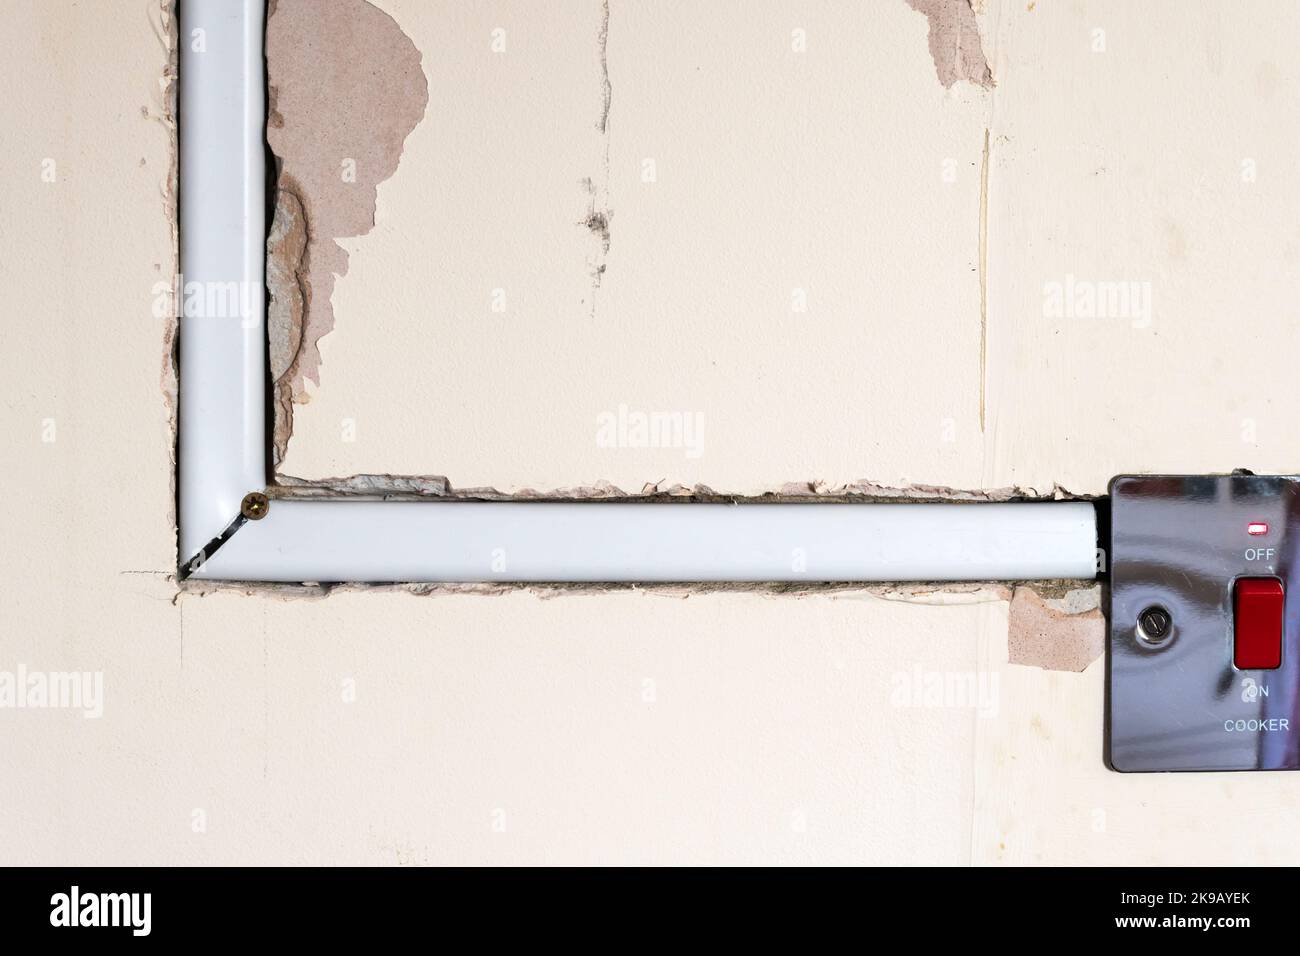 Household wiring chased into wall in conduit from electric cooker switch. Stock Photo